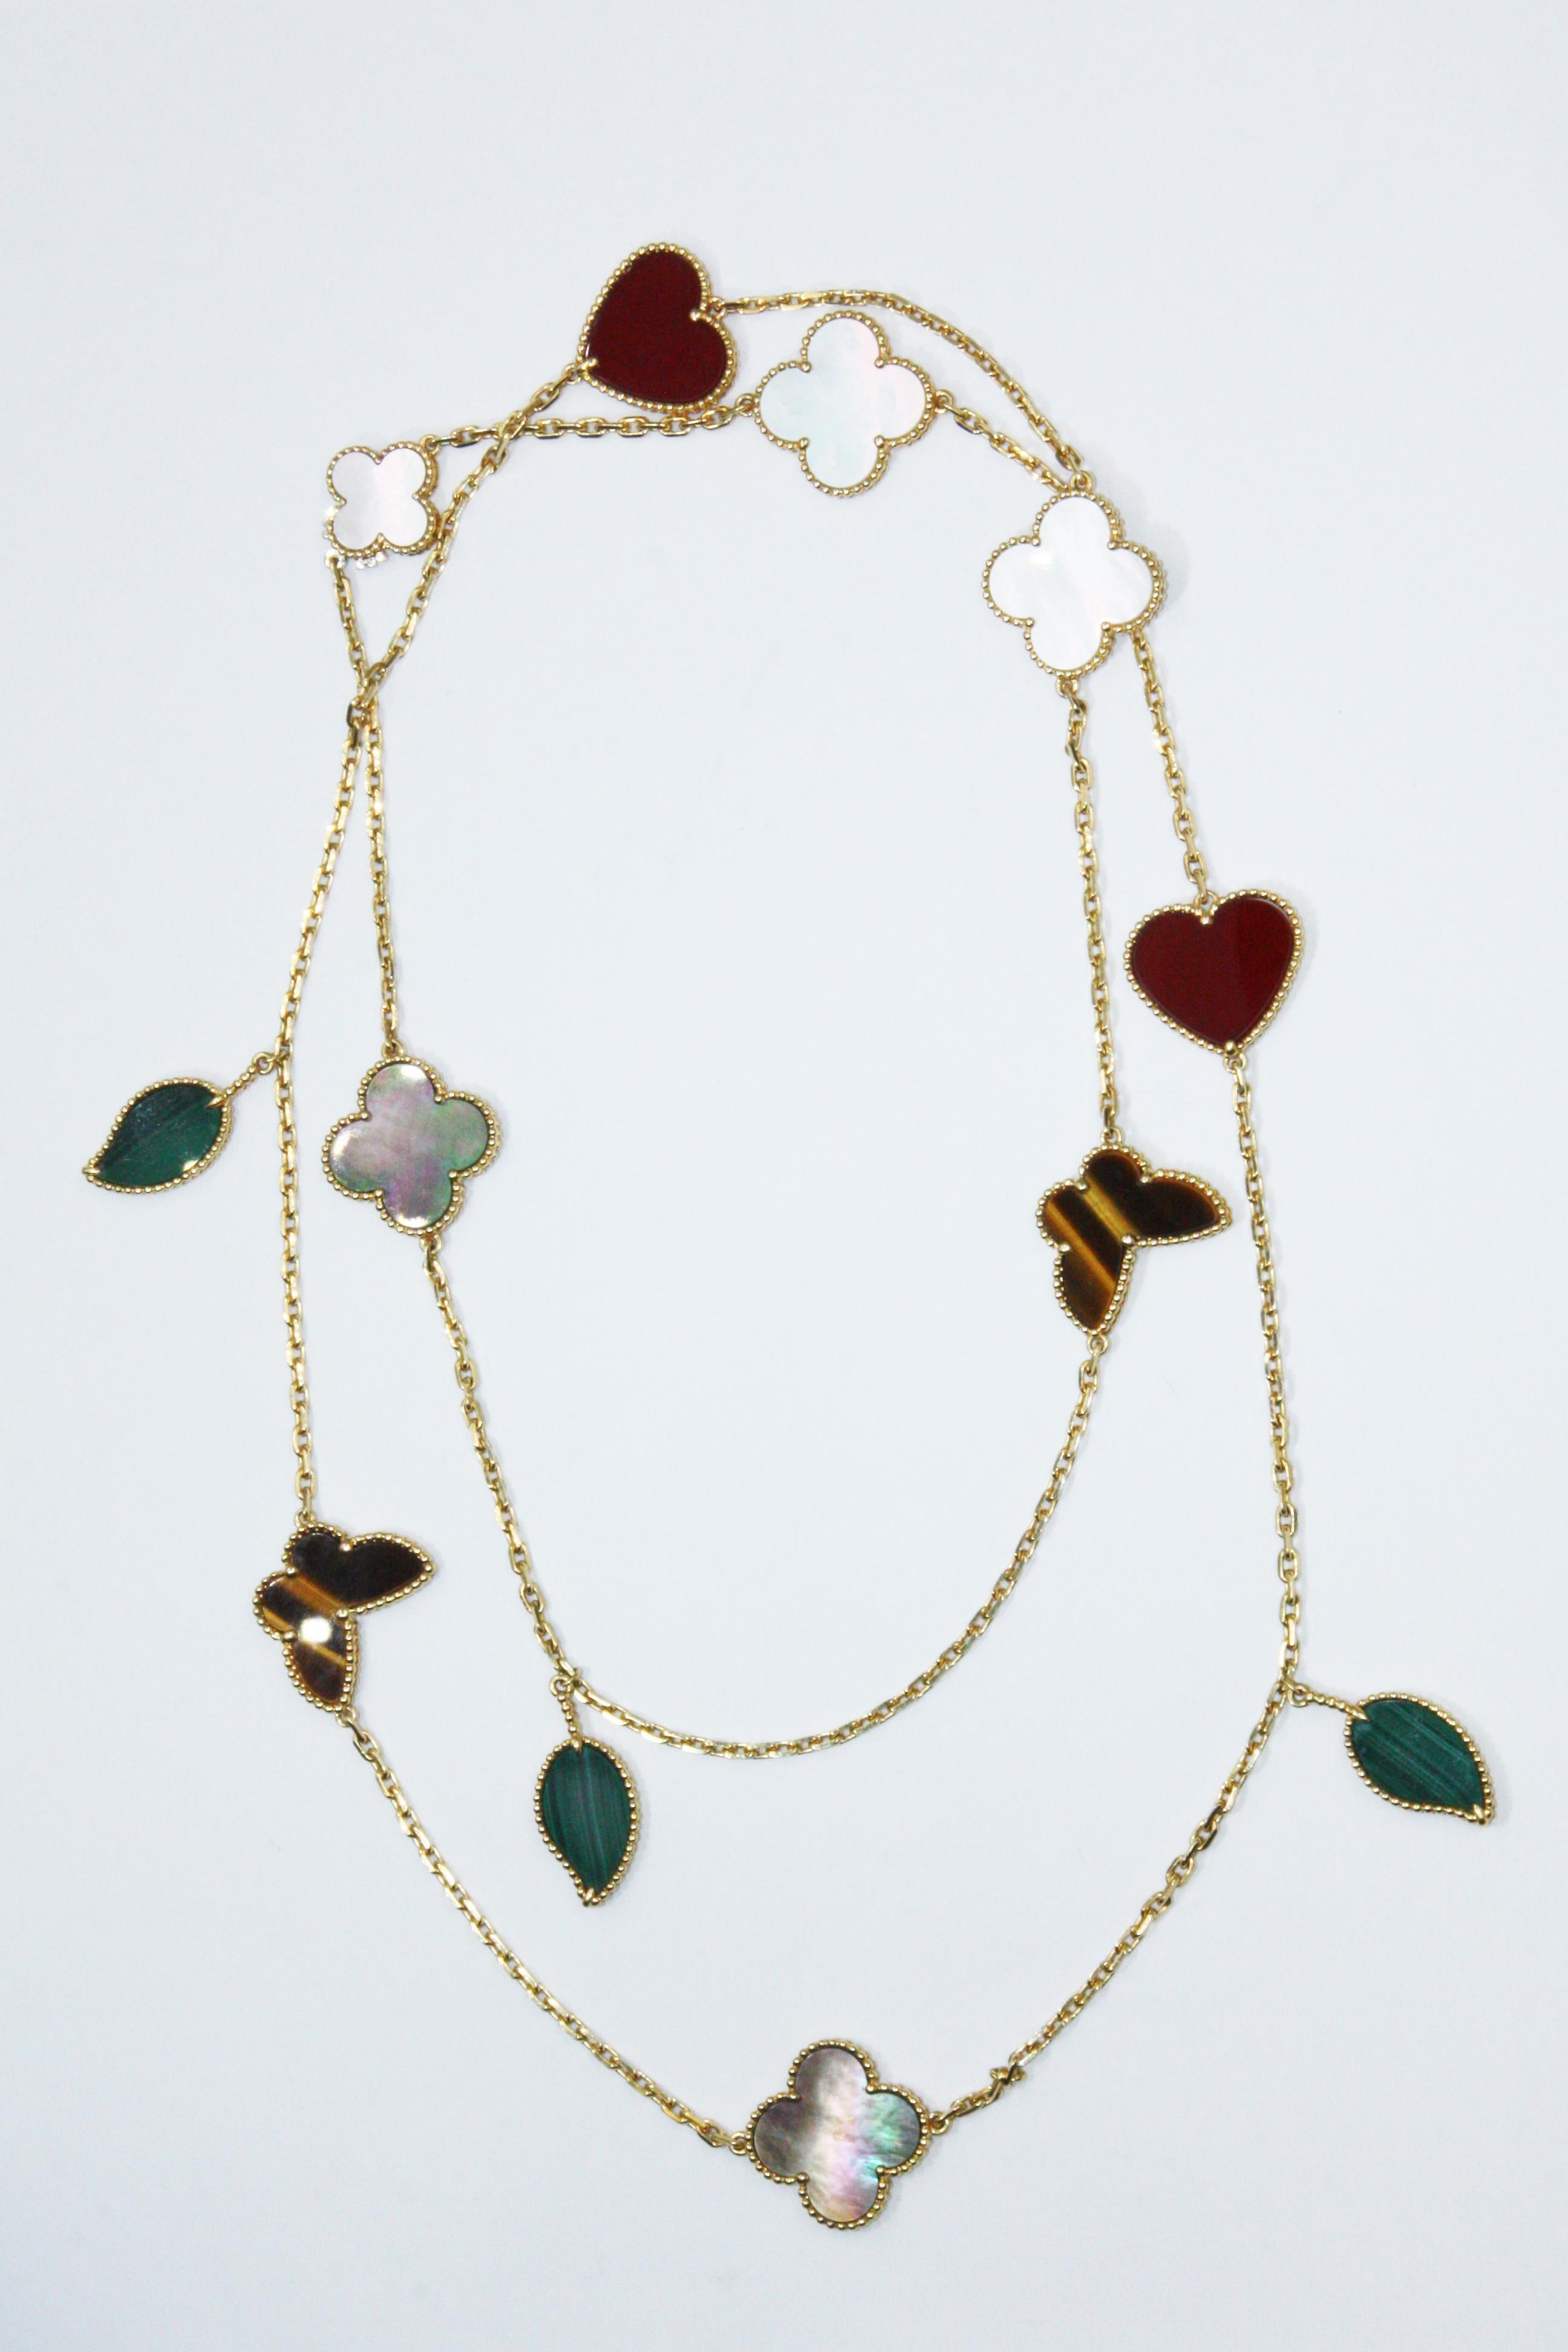 A beautiful Lucky Alhambra long necklace from Van Cleef & Arpels, made in 18k yellow gold set with 12 motifs including Mother-of-pearl, Malachite, Tiger Eye and Carnelian. RE: VCARD80100

The Necklace set with 2 Carnelian, 3 Malachite, 2 Tiger Eye